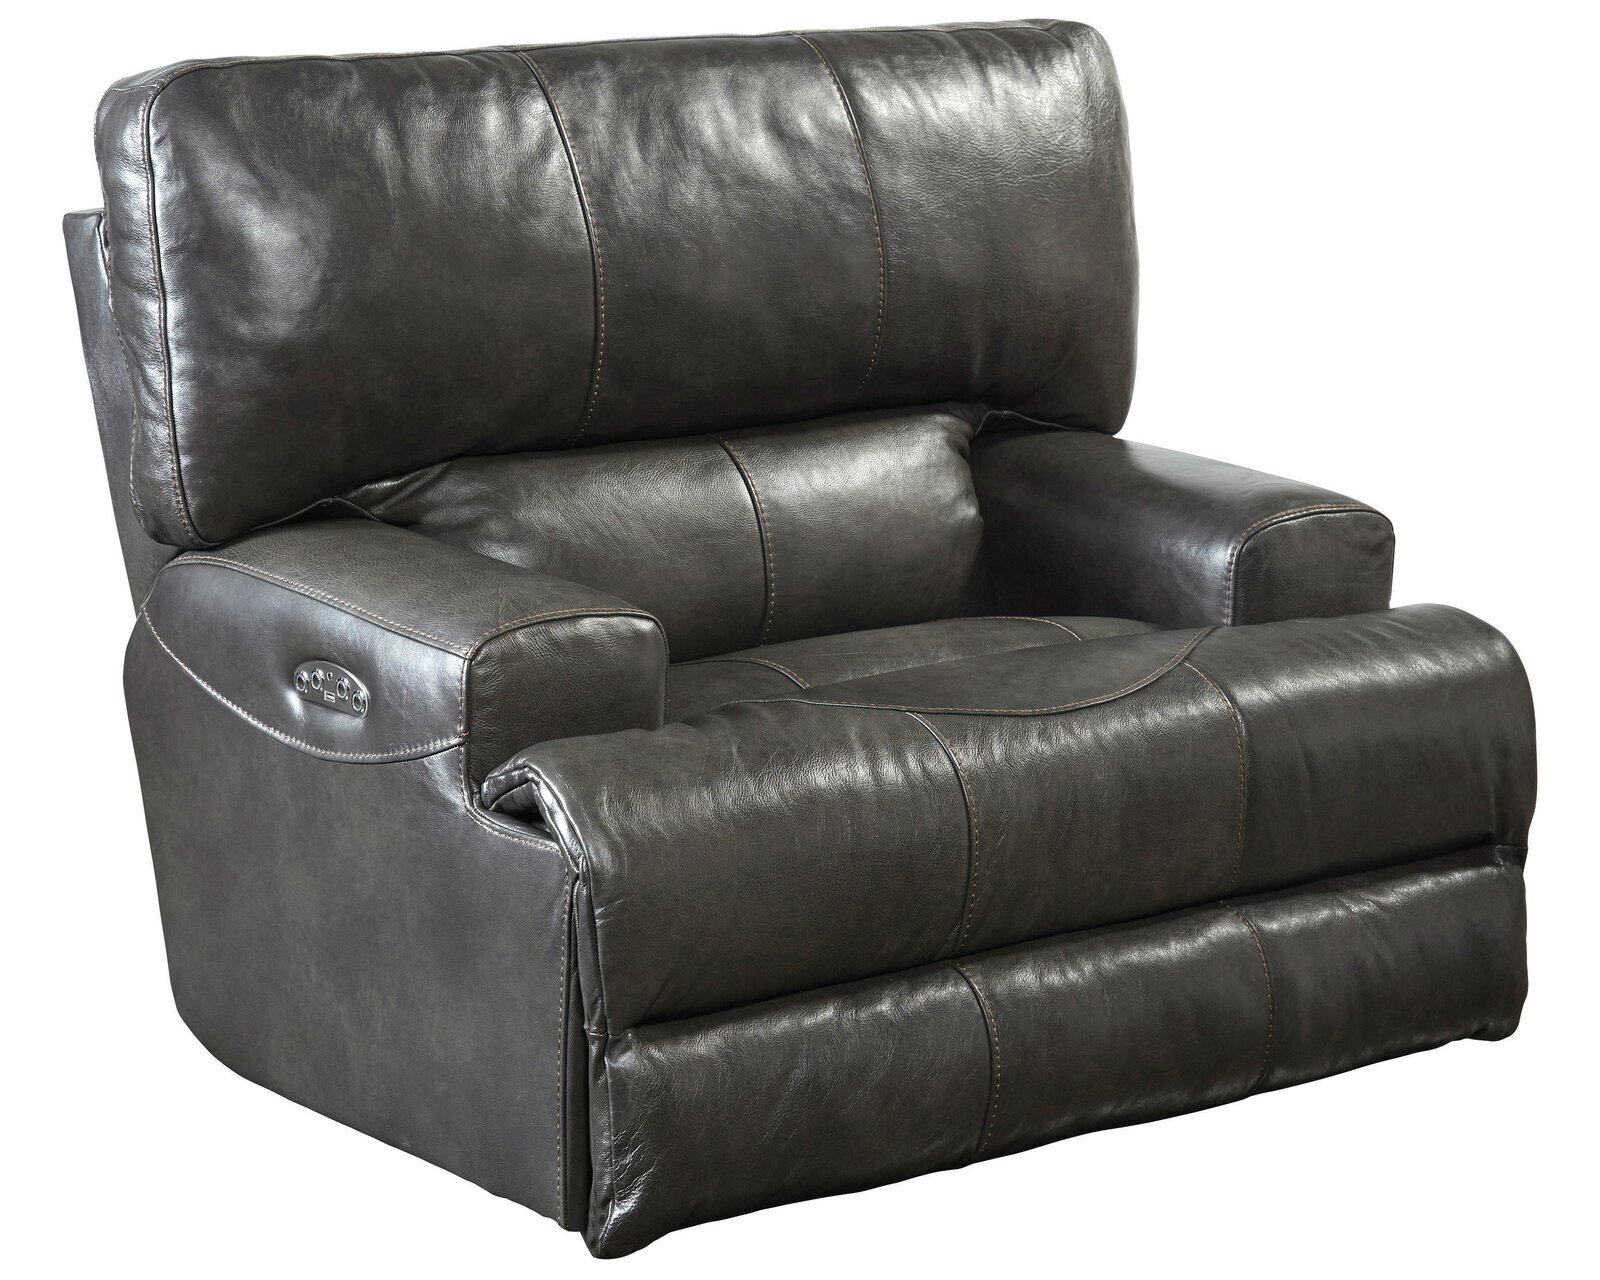 Luxurious Leather Double Recliner Chair